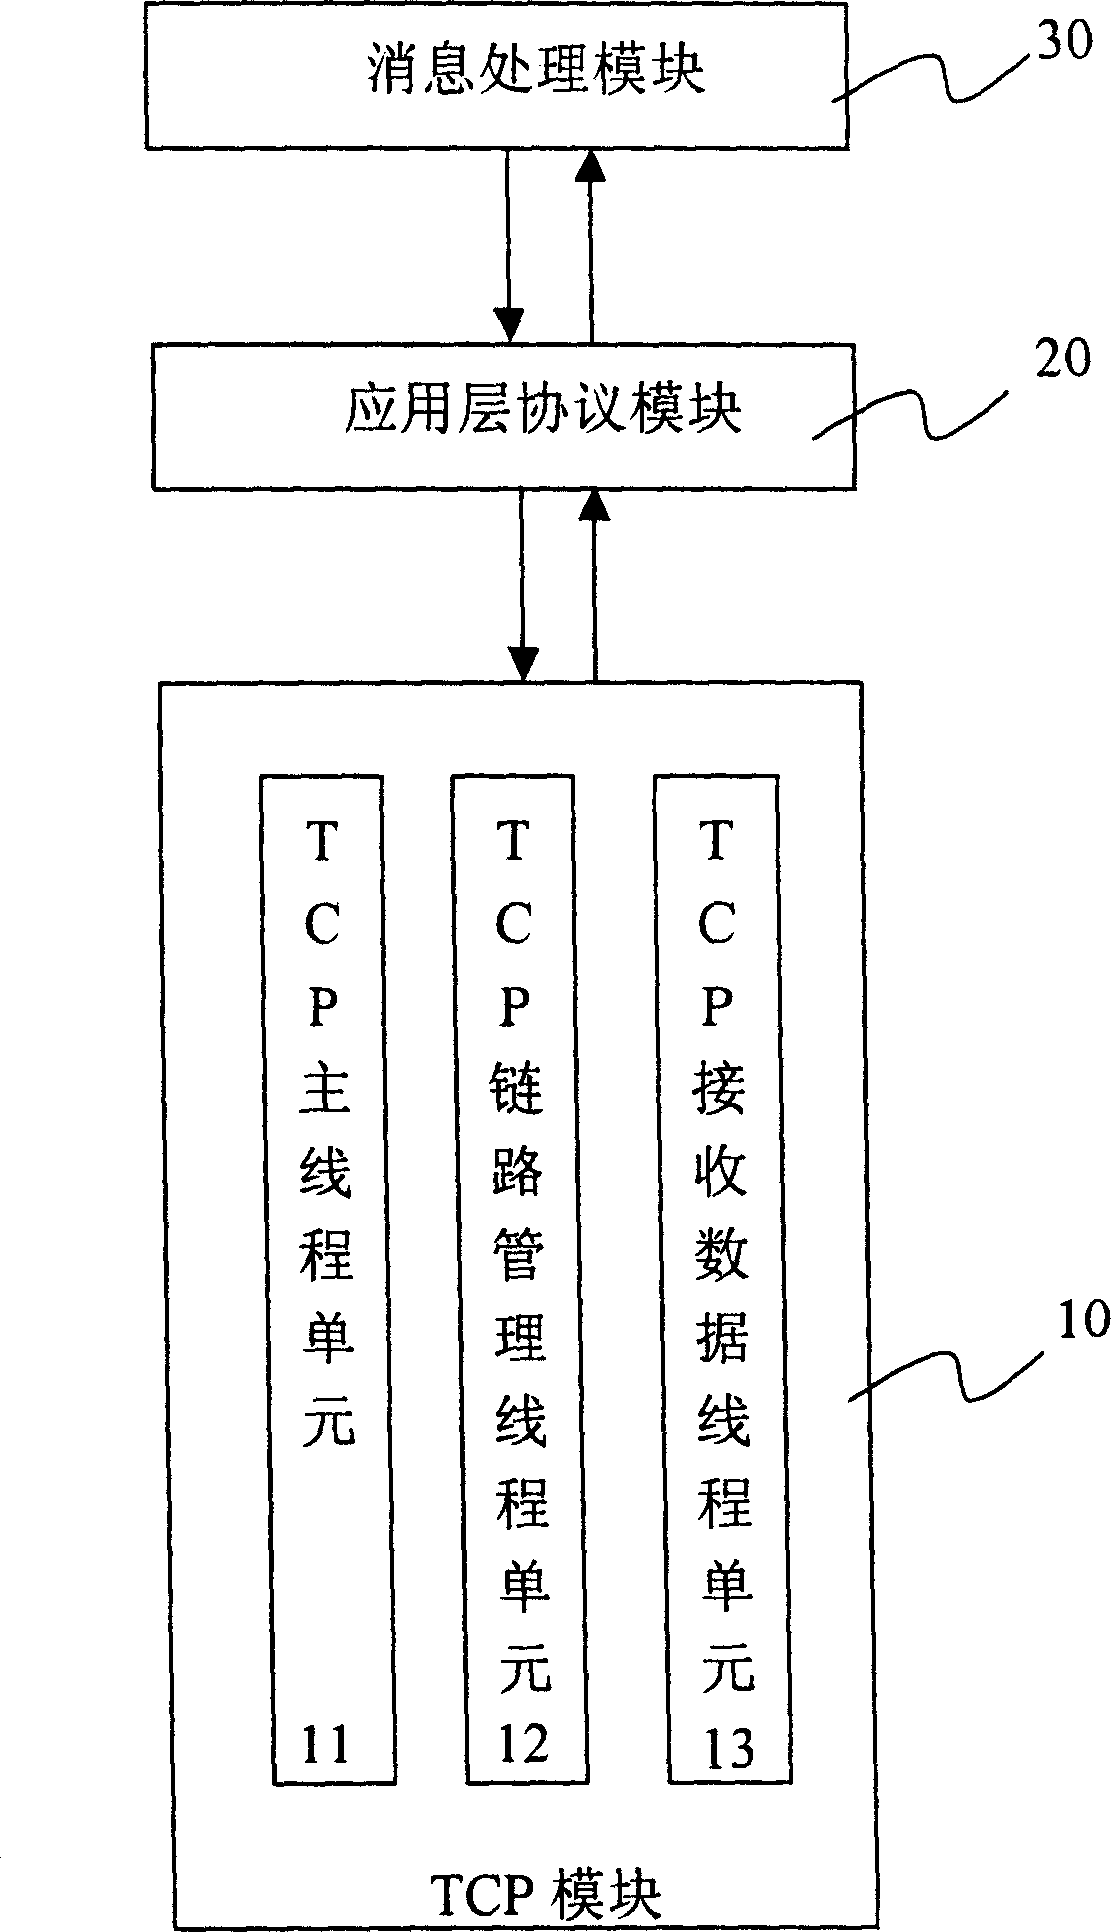 Multi-user concurrent insertion device and its method